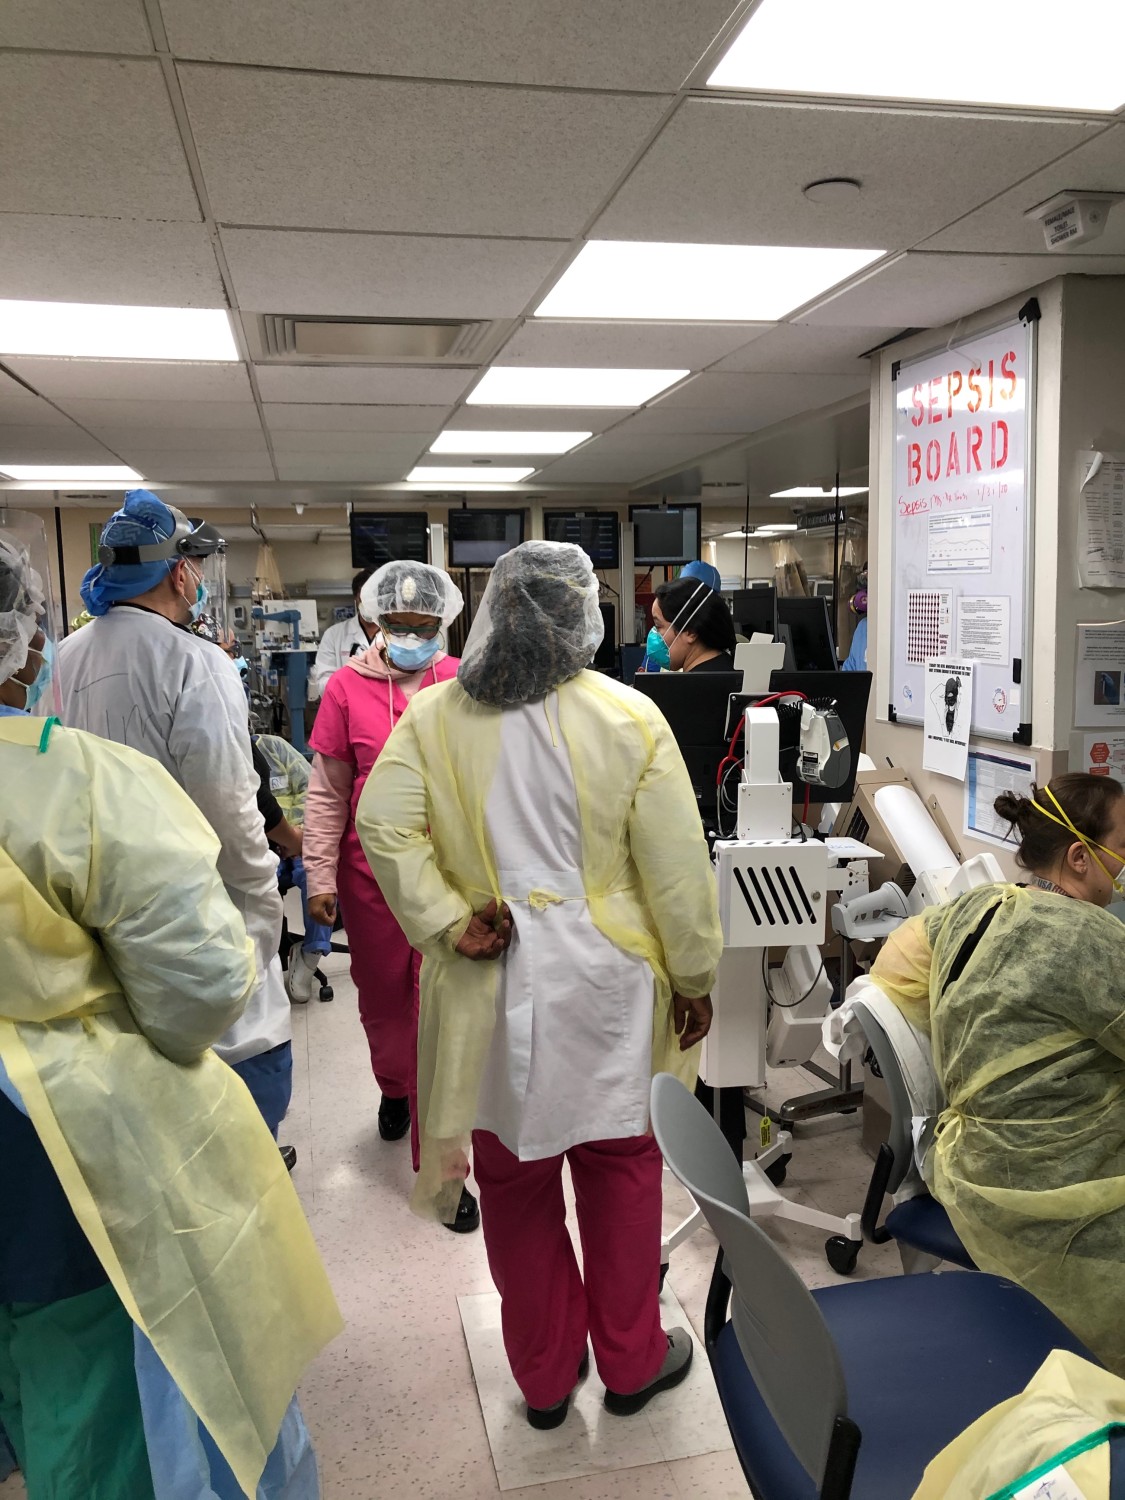 Healthcare workers in full PPE gaze at the "Sepsis Board" in the Emergency Room.